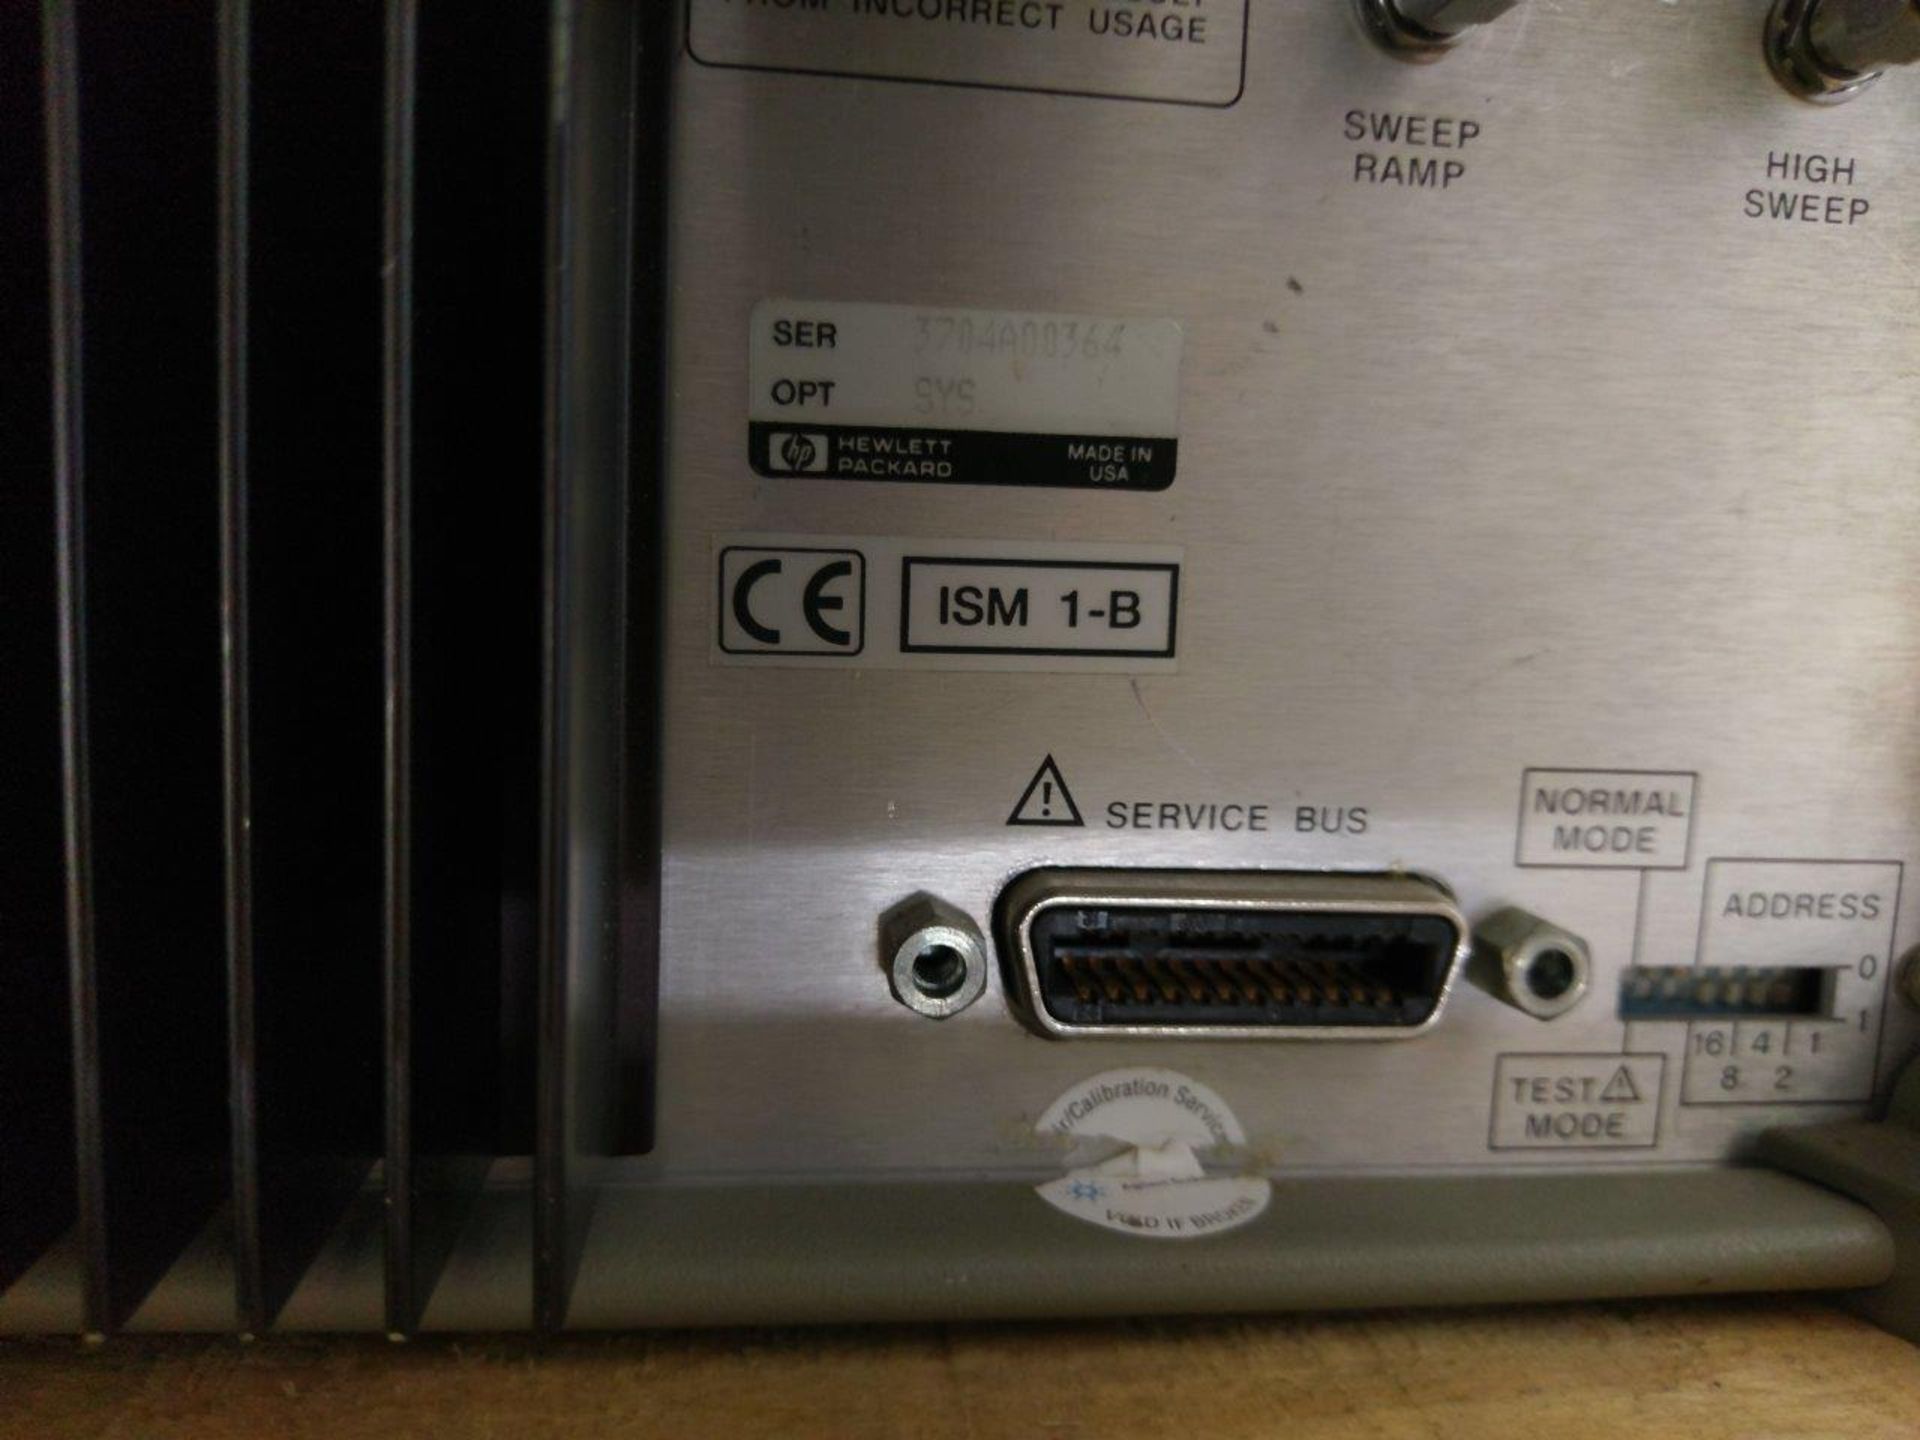 HP Hewlett Packard Model # 8546A EMI Receiver with Model # 85460A RF Filter Section - Image 8 of 8